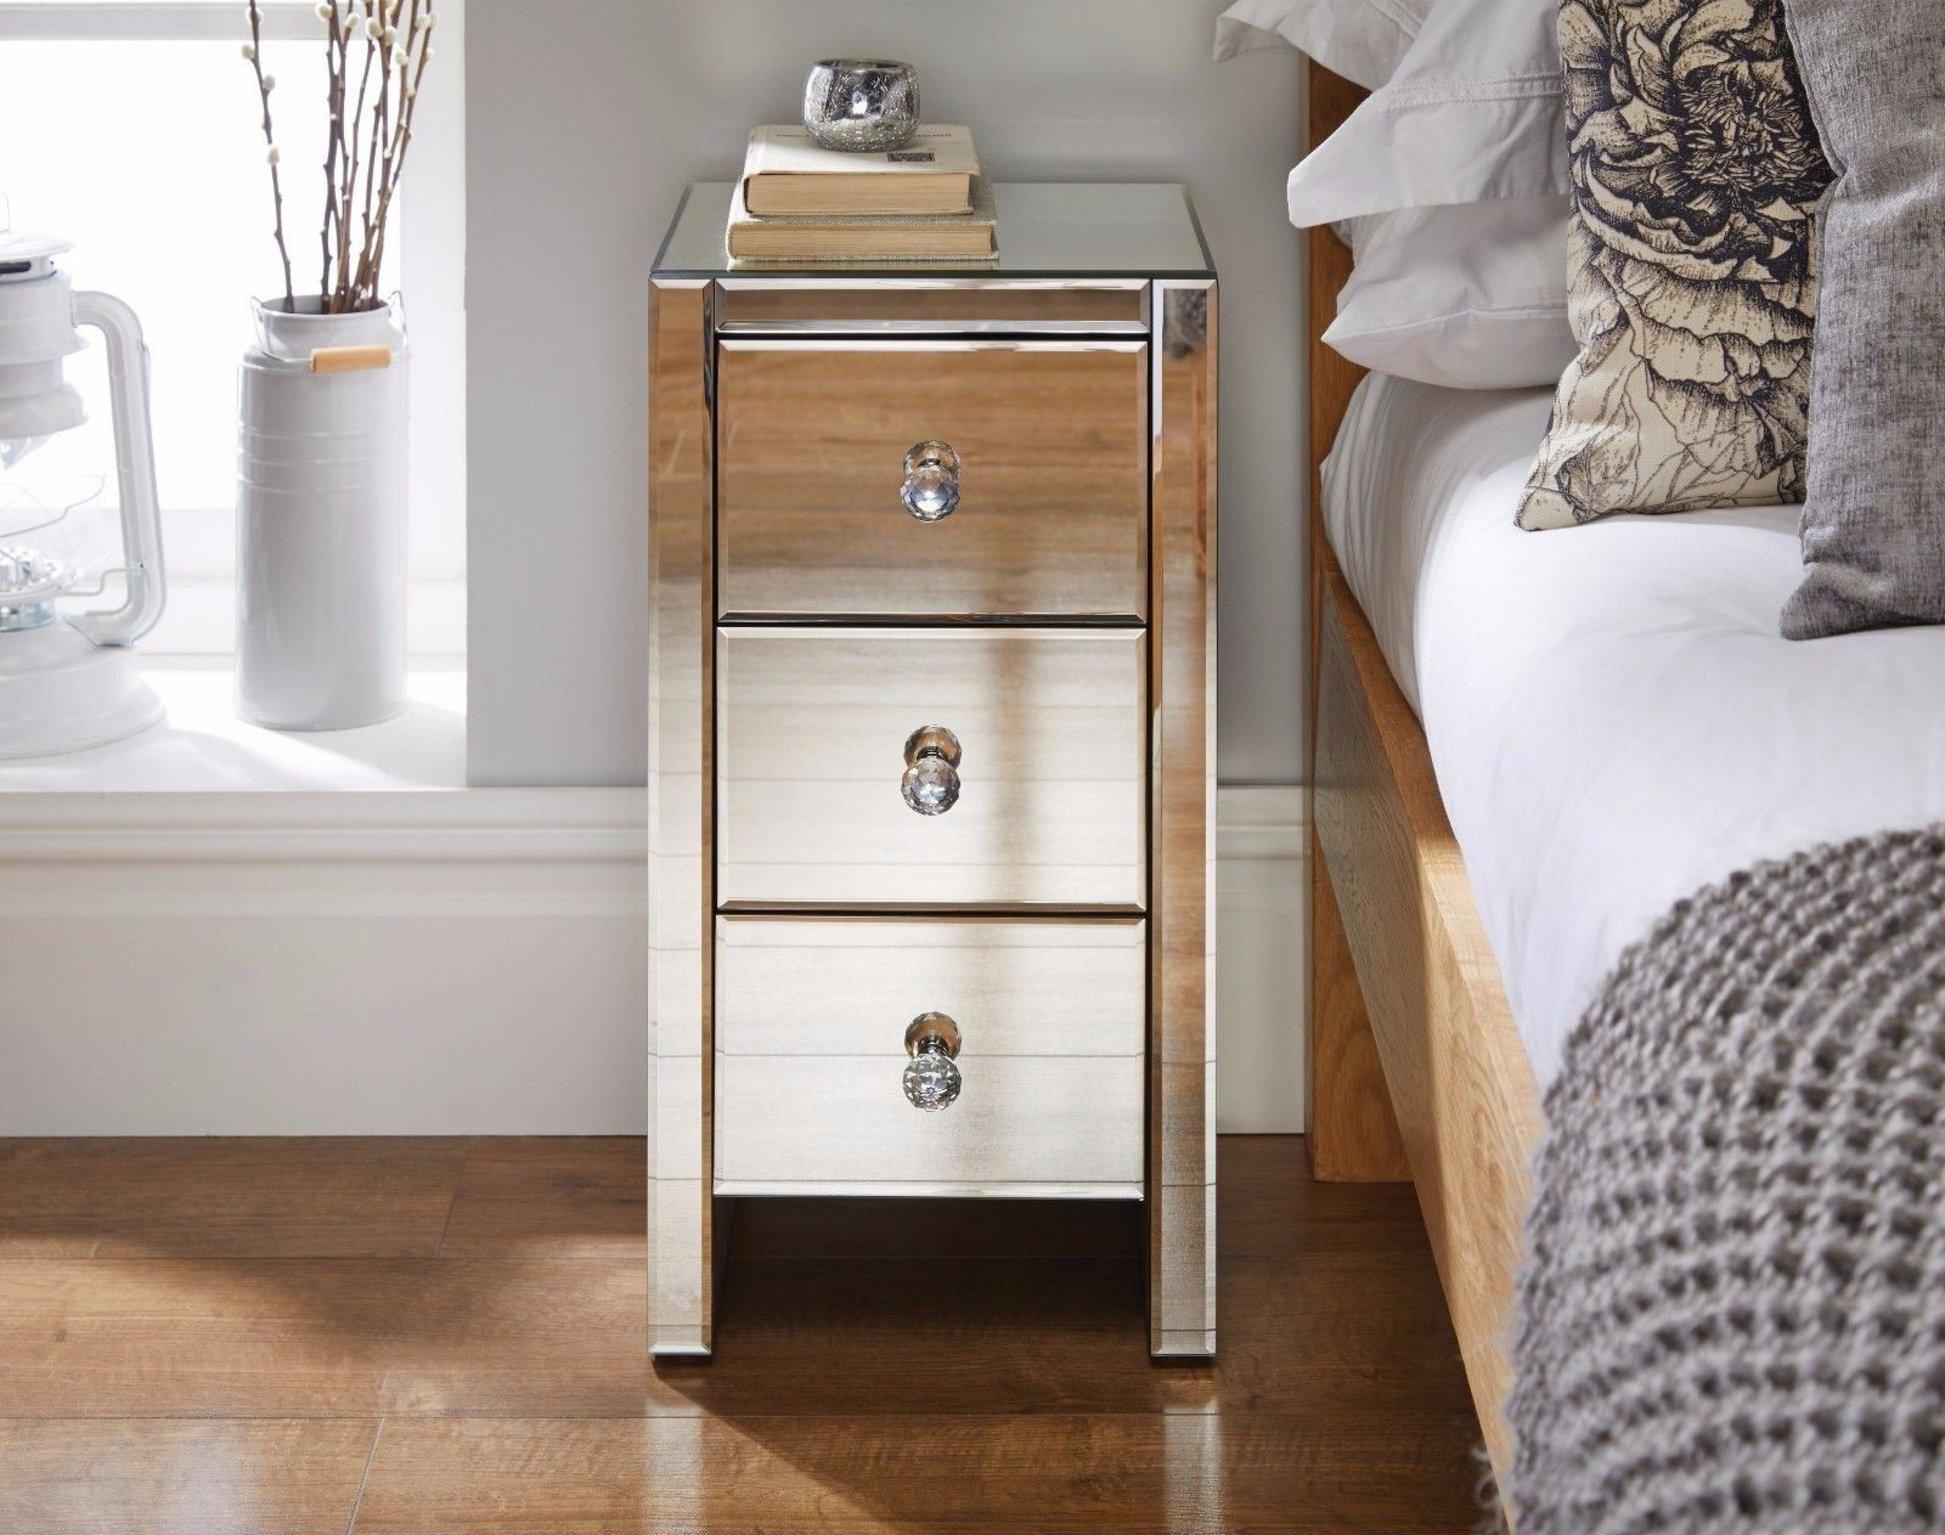 Murano Slim 3 Drawer Mirrored Square bedside Table With Crystaline Shaped Handles